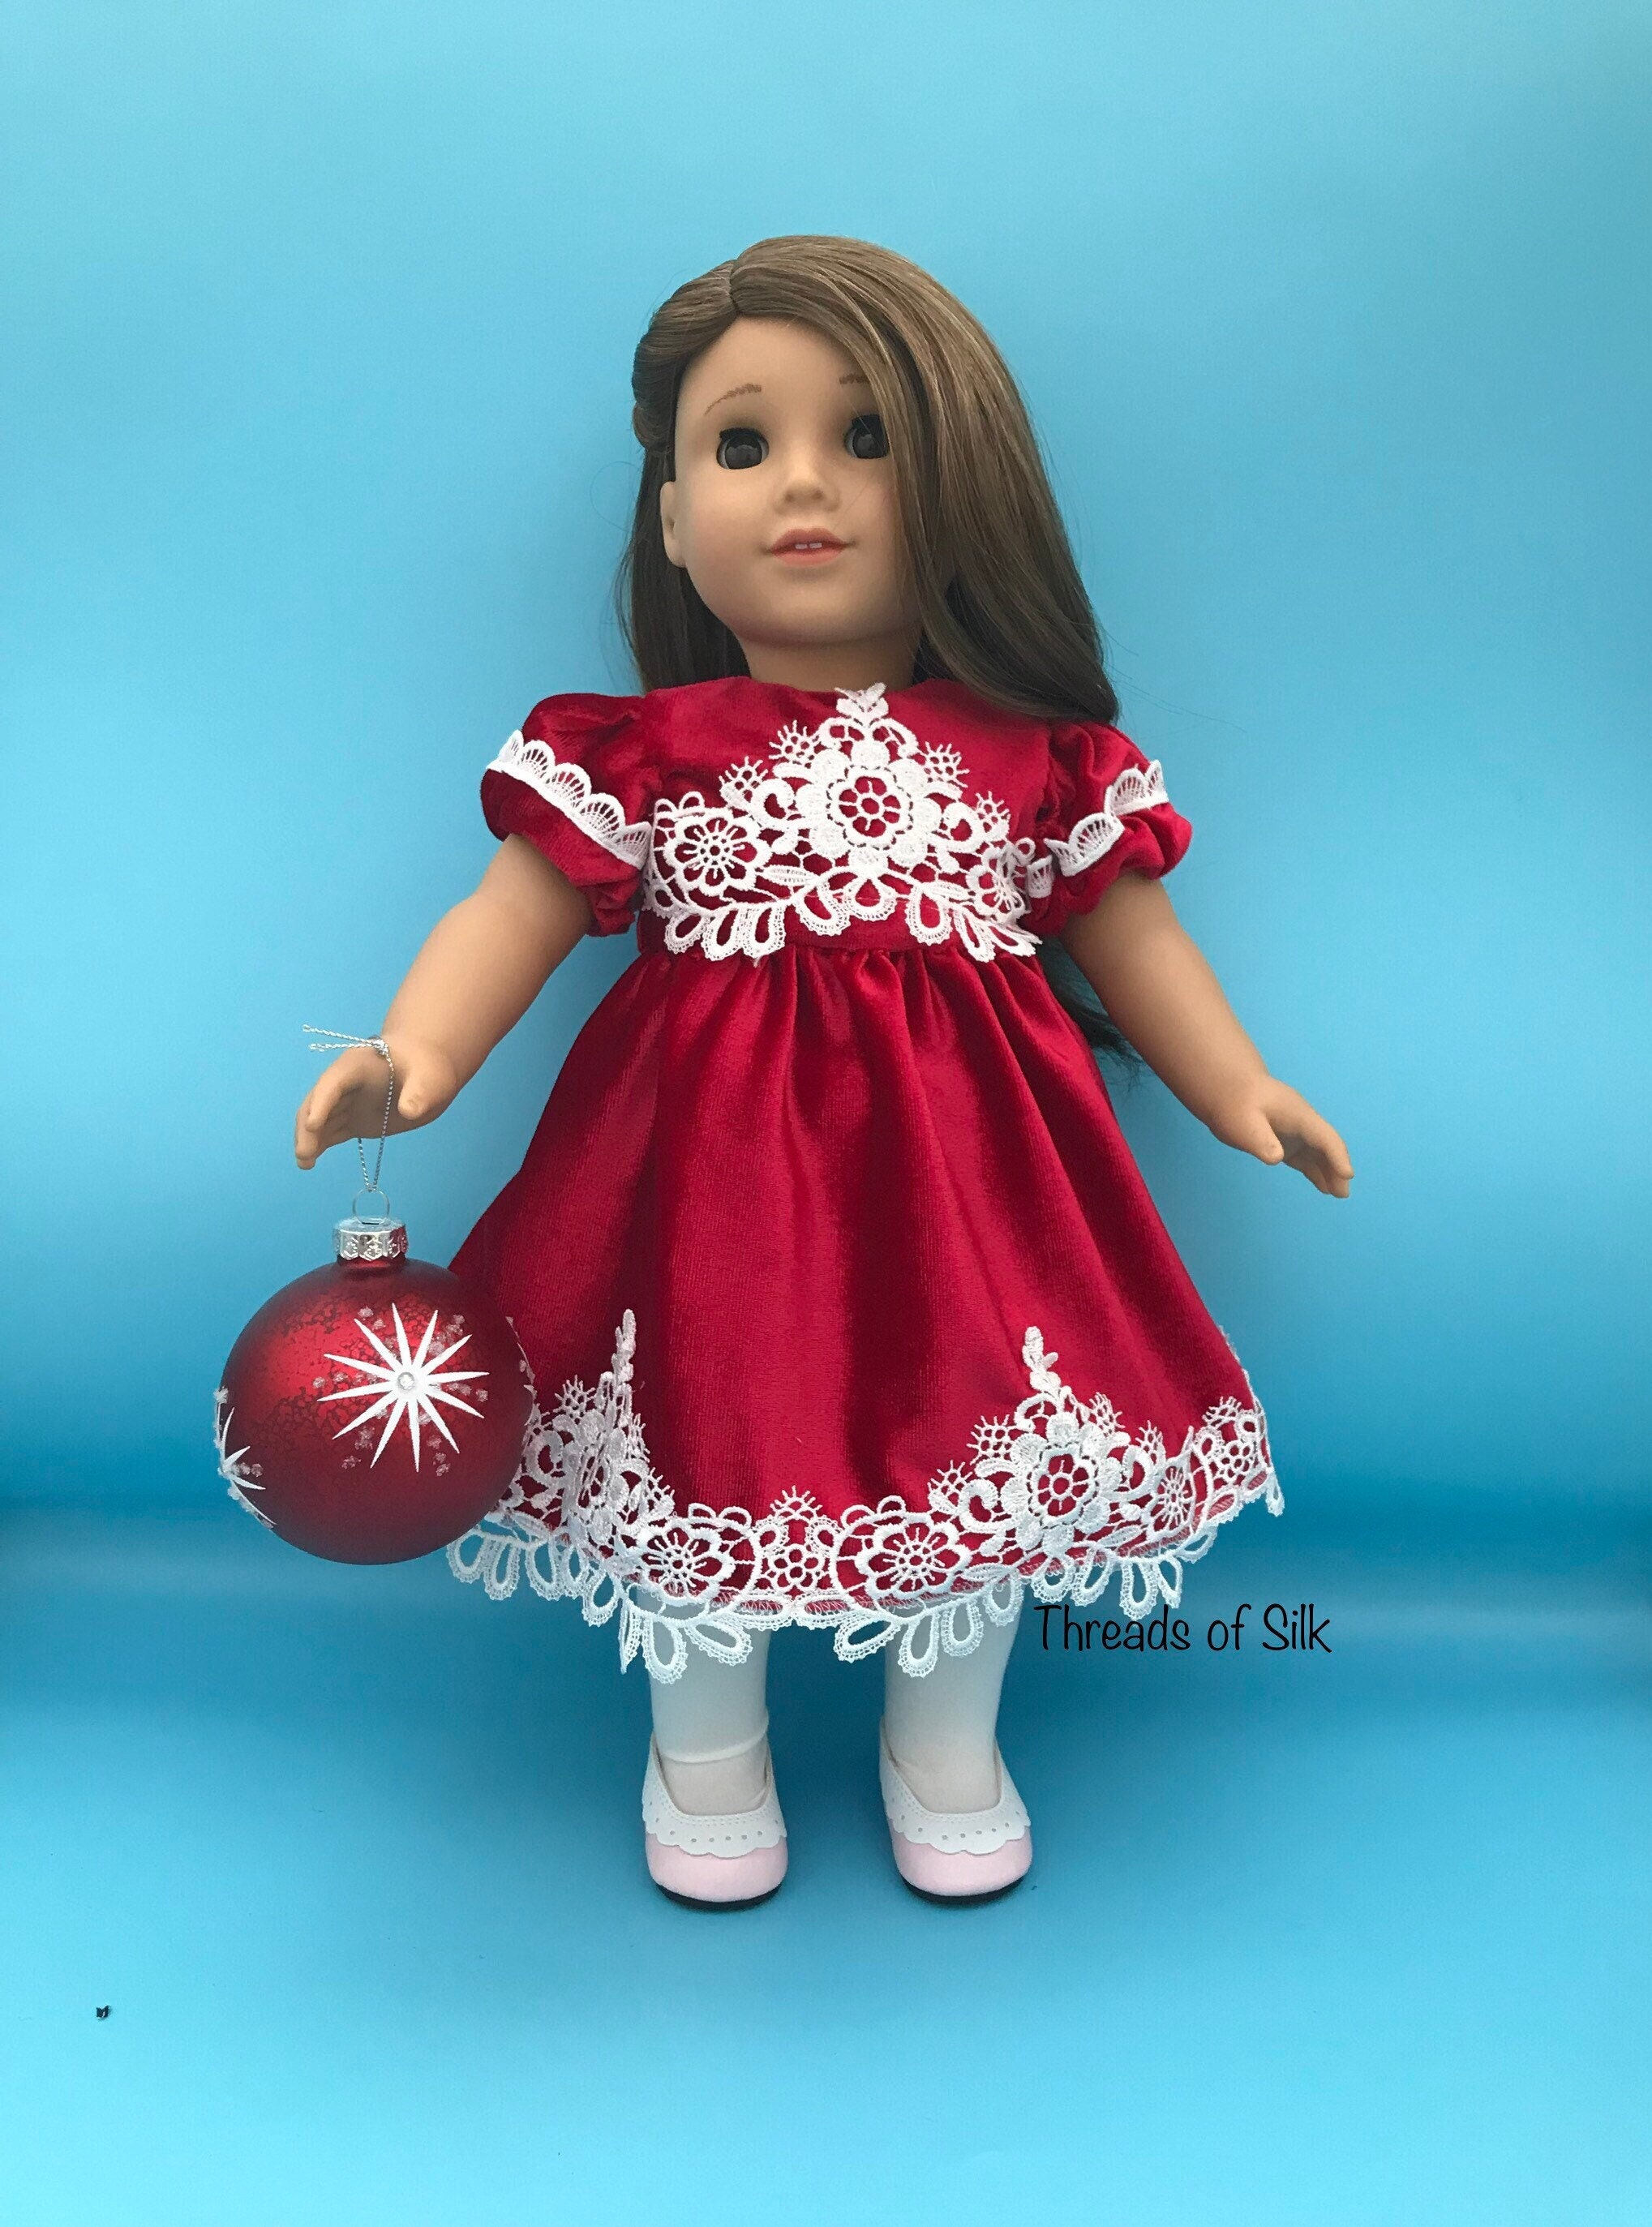 RED PARTY DRESS Designafriend And Our generation Dolls 18” Dolls Clothes 